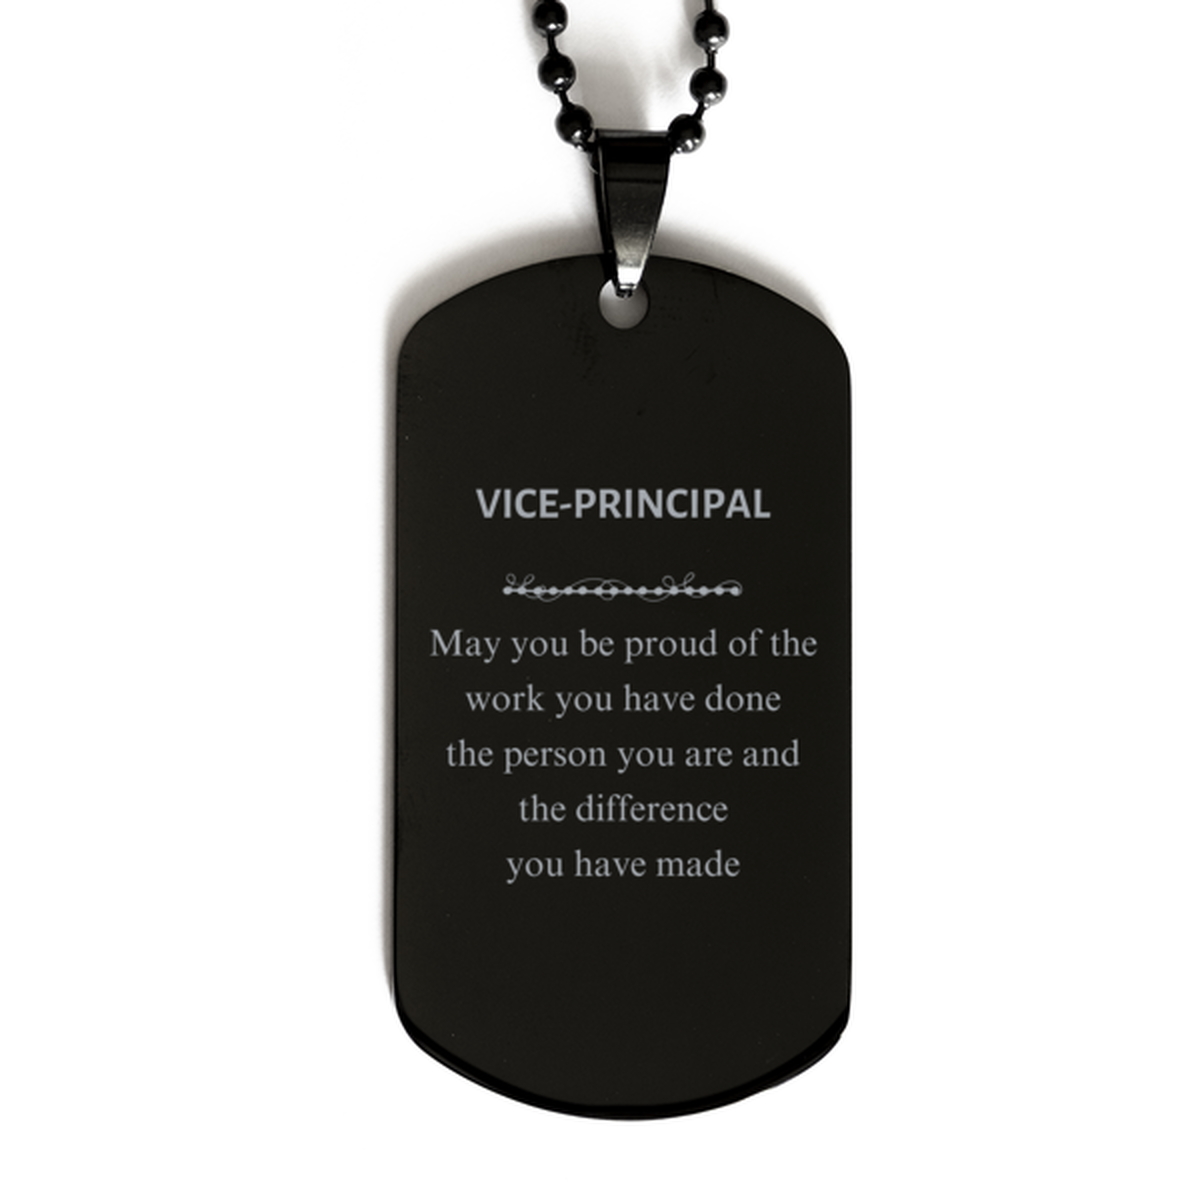 Vice-principal May you be proud of the work you have done, Retirement Vice-principal Black Dog Tag for Colleague Appreciation Gifts Amazing for Vice-principal